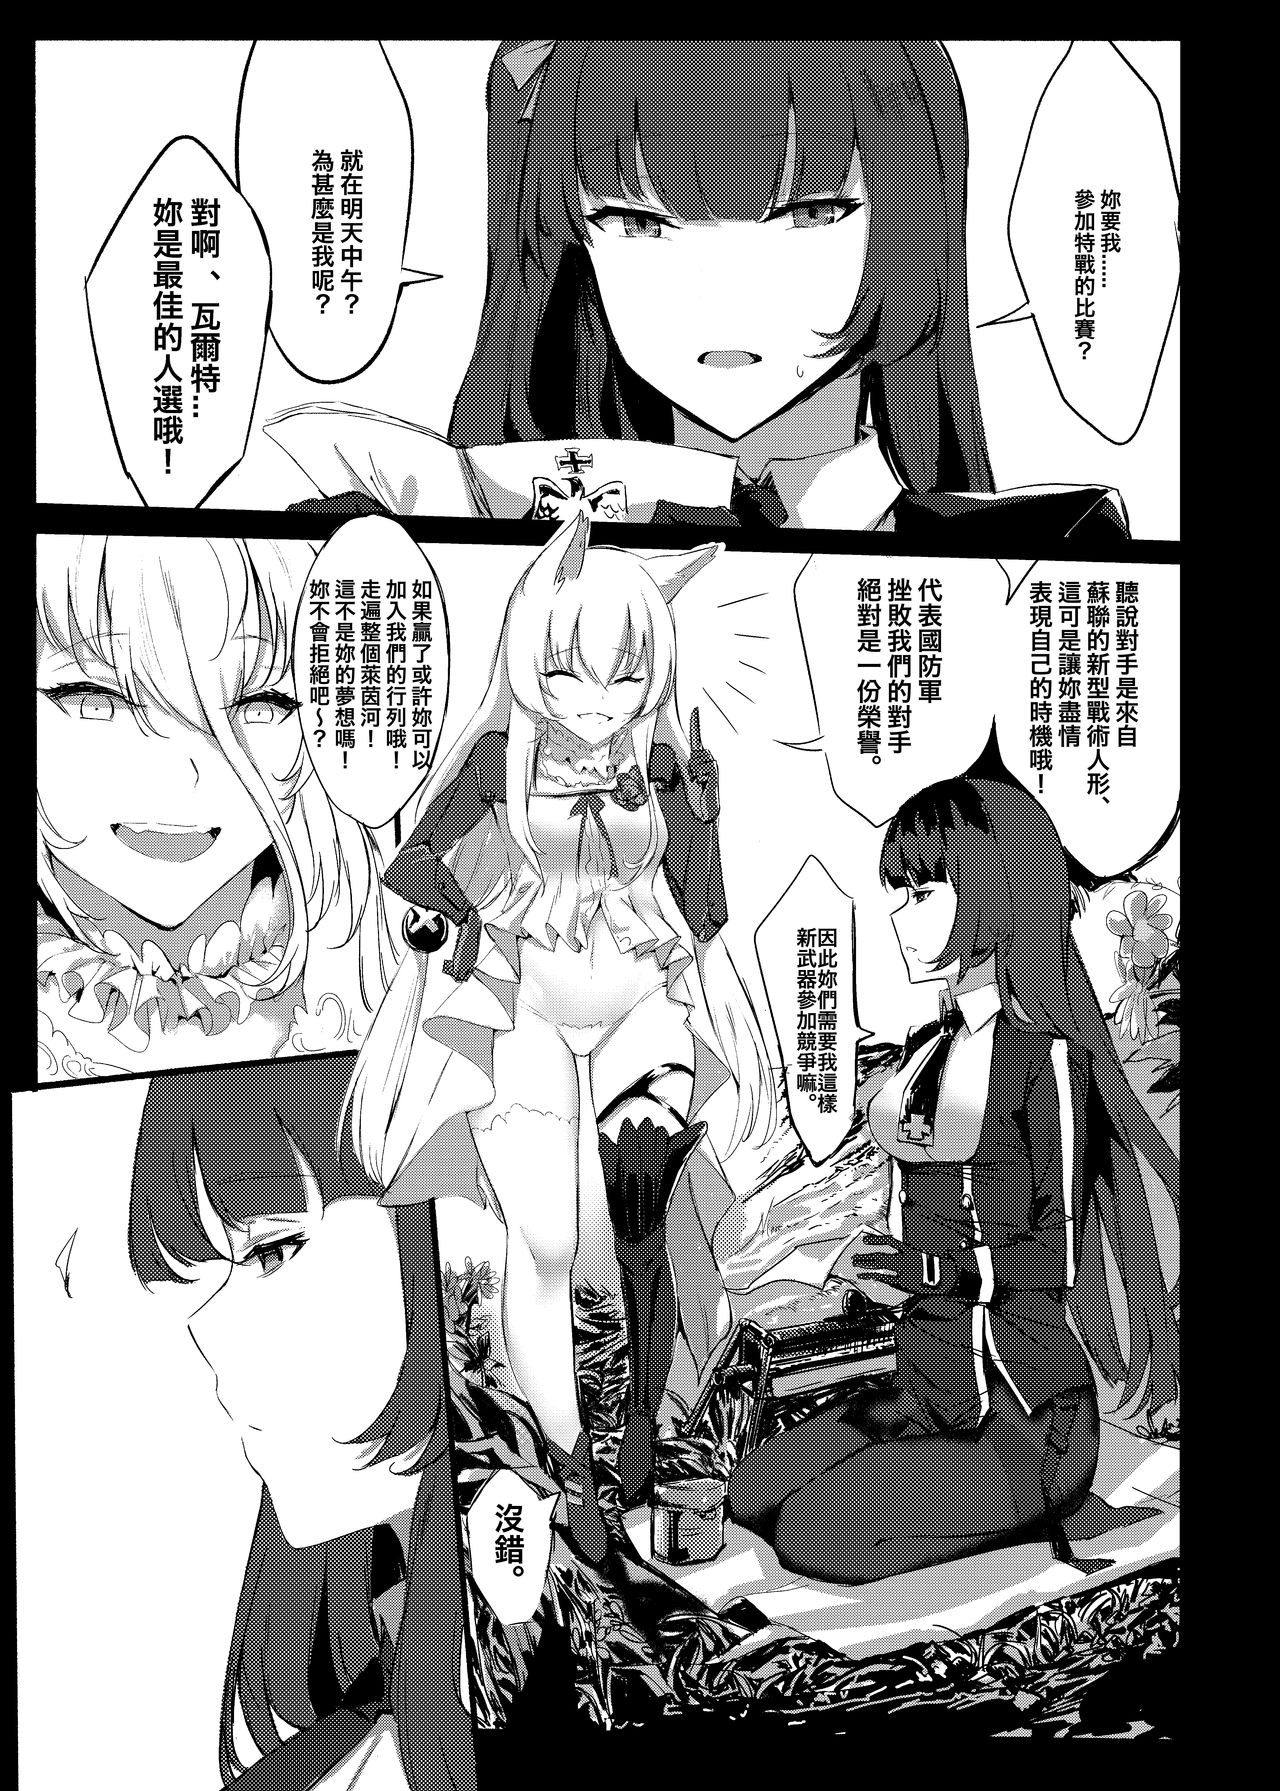 (FF33) [史本] HK416 Project (Girls' Frontline) [Chinese] [Sample] 1